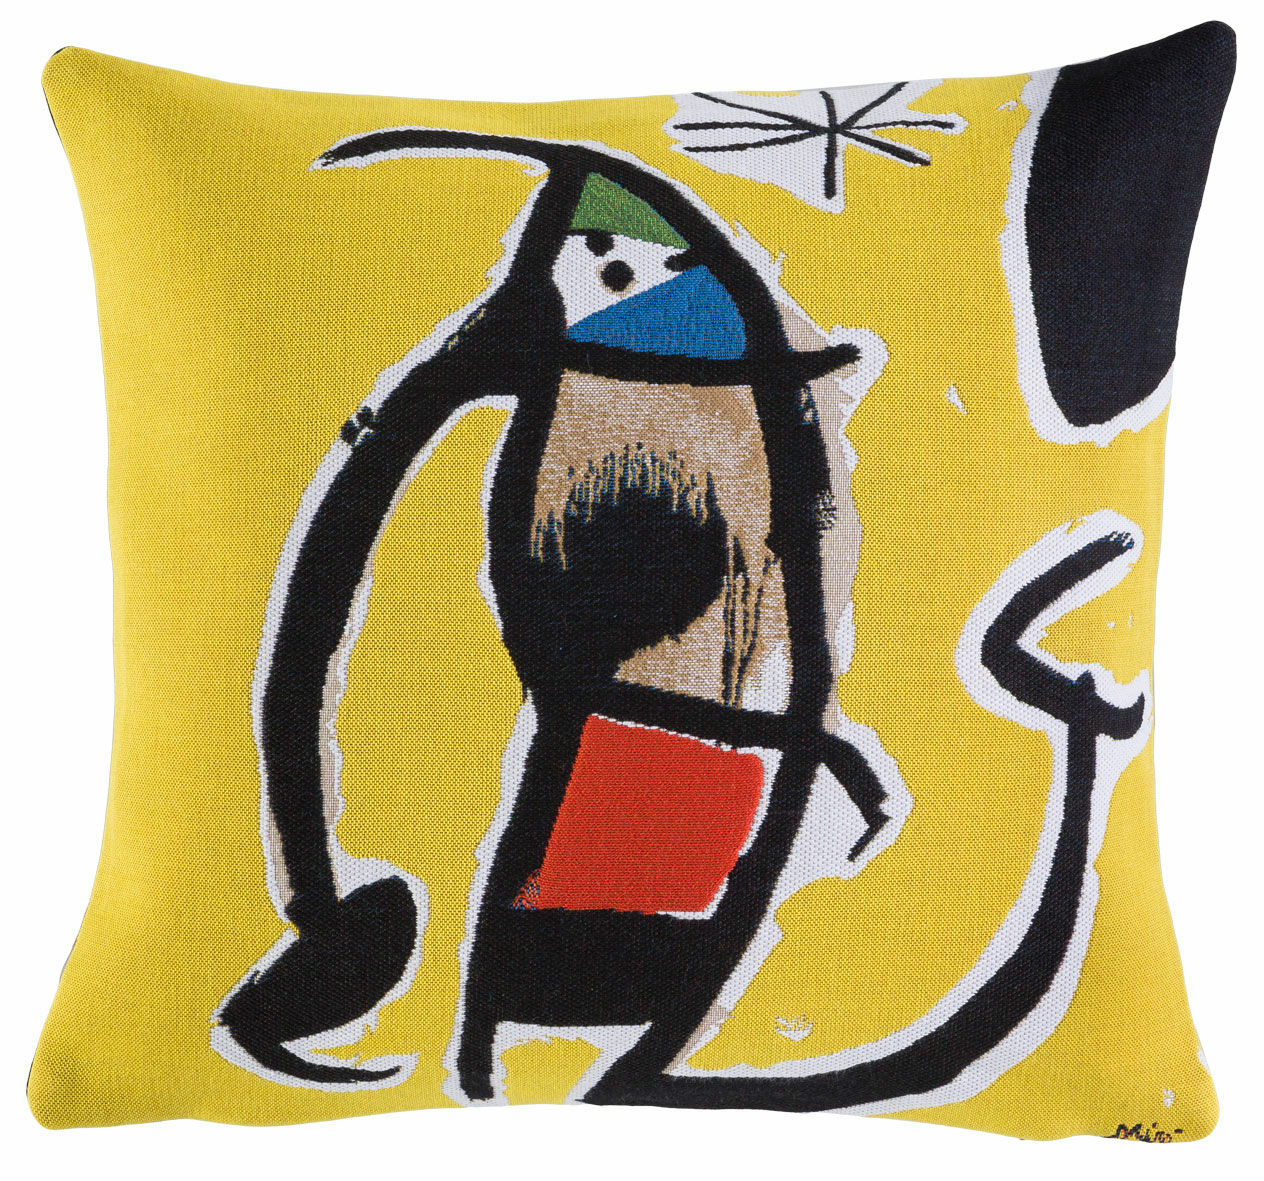 Cushion cover "Woman, Bird and Star" by Joan Miró